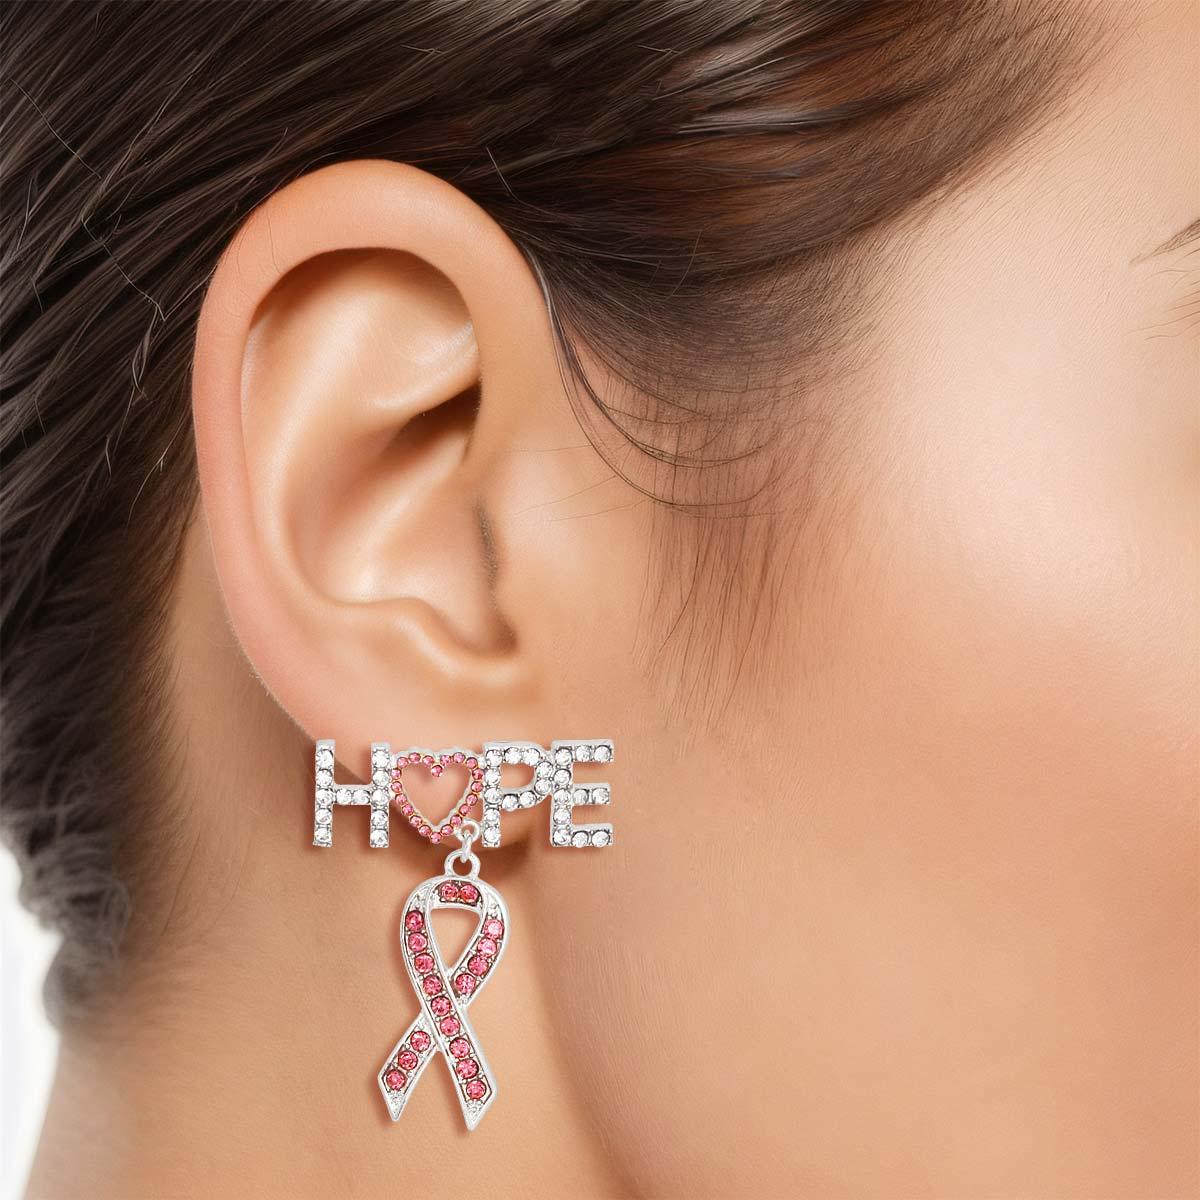 Stylish Hope Ribbon Drop Earrings: Complete Your Look with Fashion Jewelry